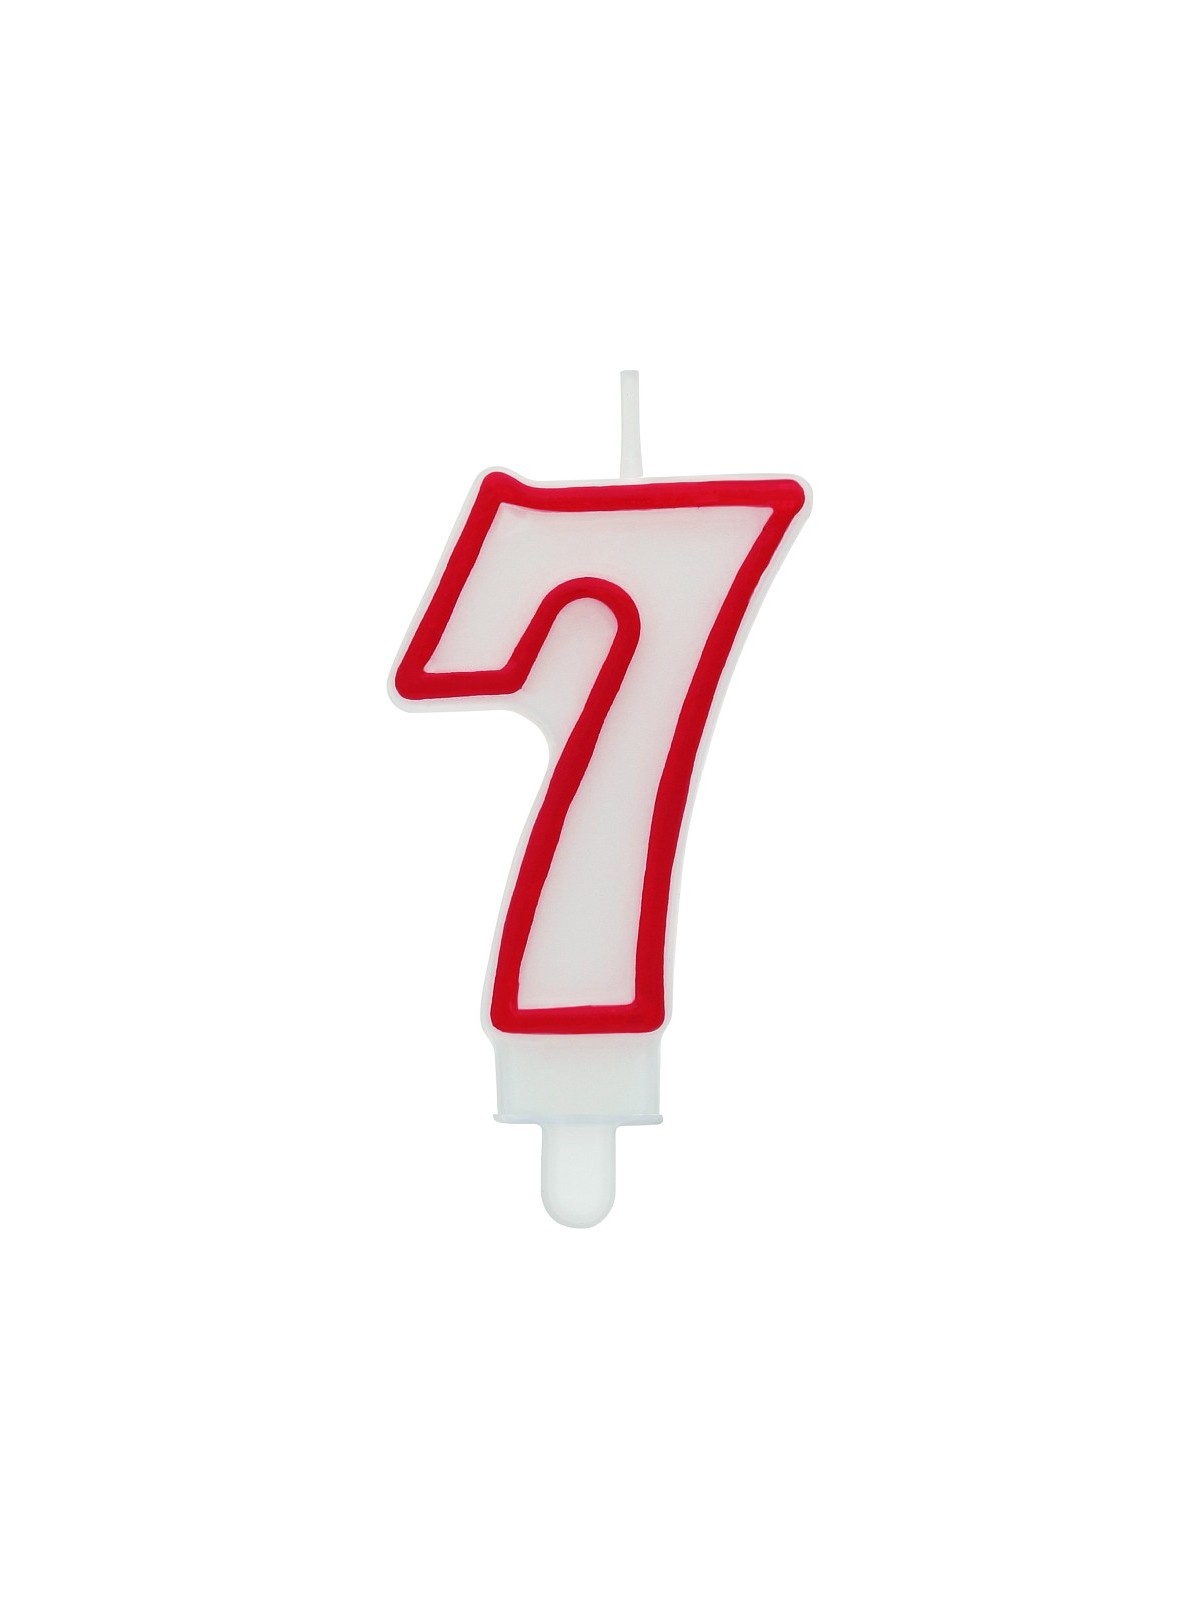 Cake candle with red border - number 7